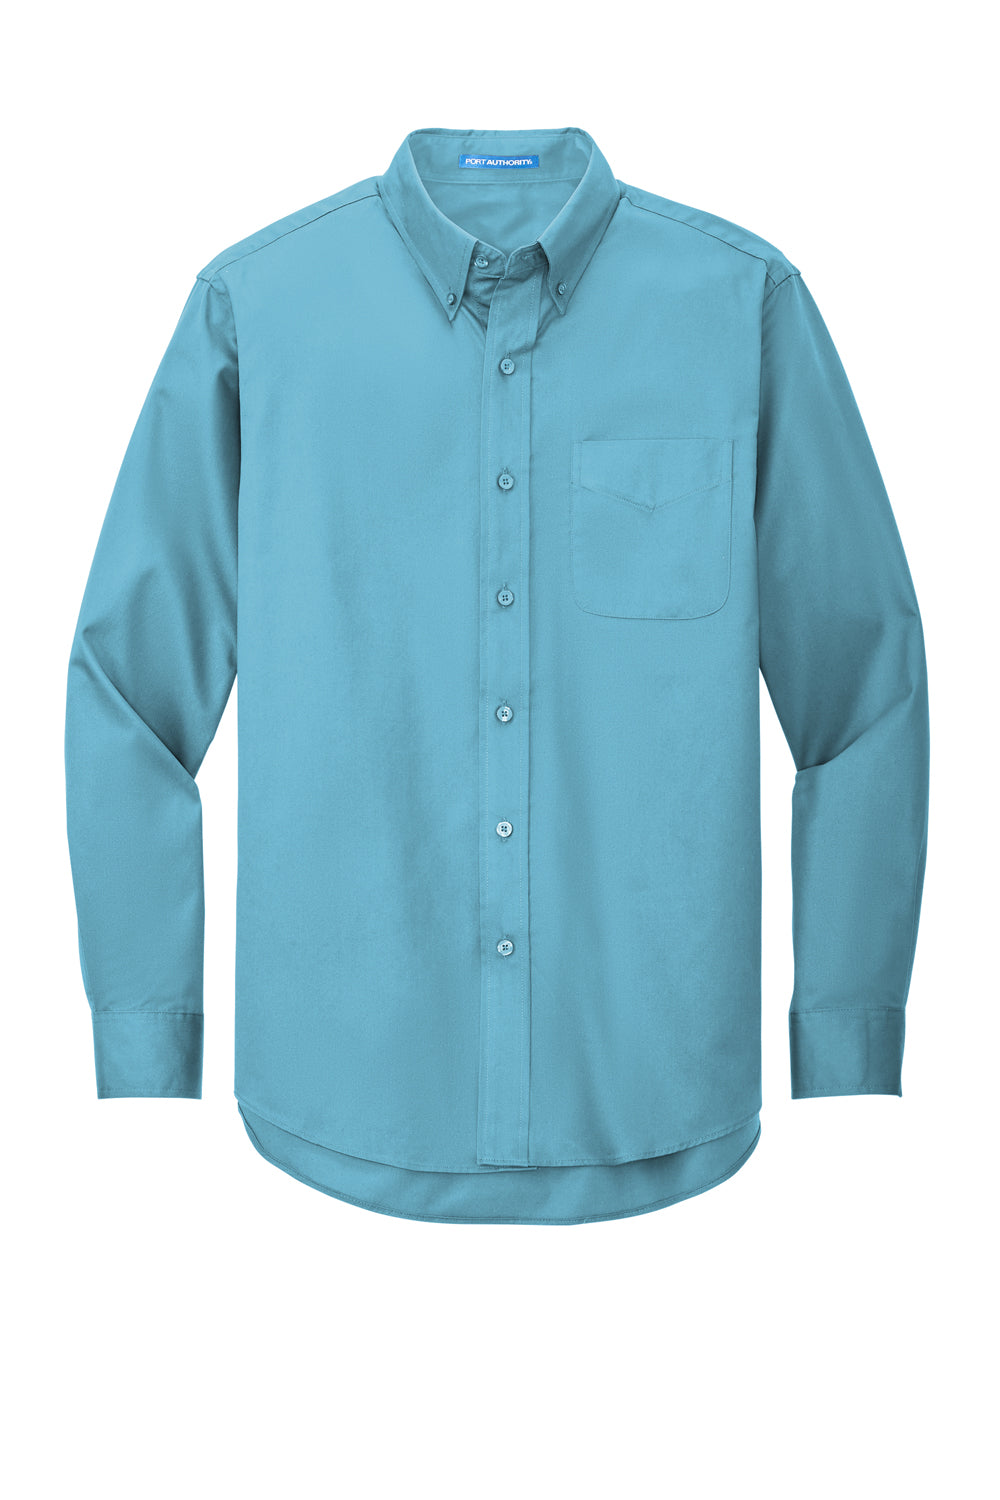 Port Authority S608/TLS608/S608ES Mens Easy Care Wrinkle Resistant Long Sleeve Button Down Shirt w/ Pocket Maui Blue Flat Front